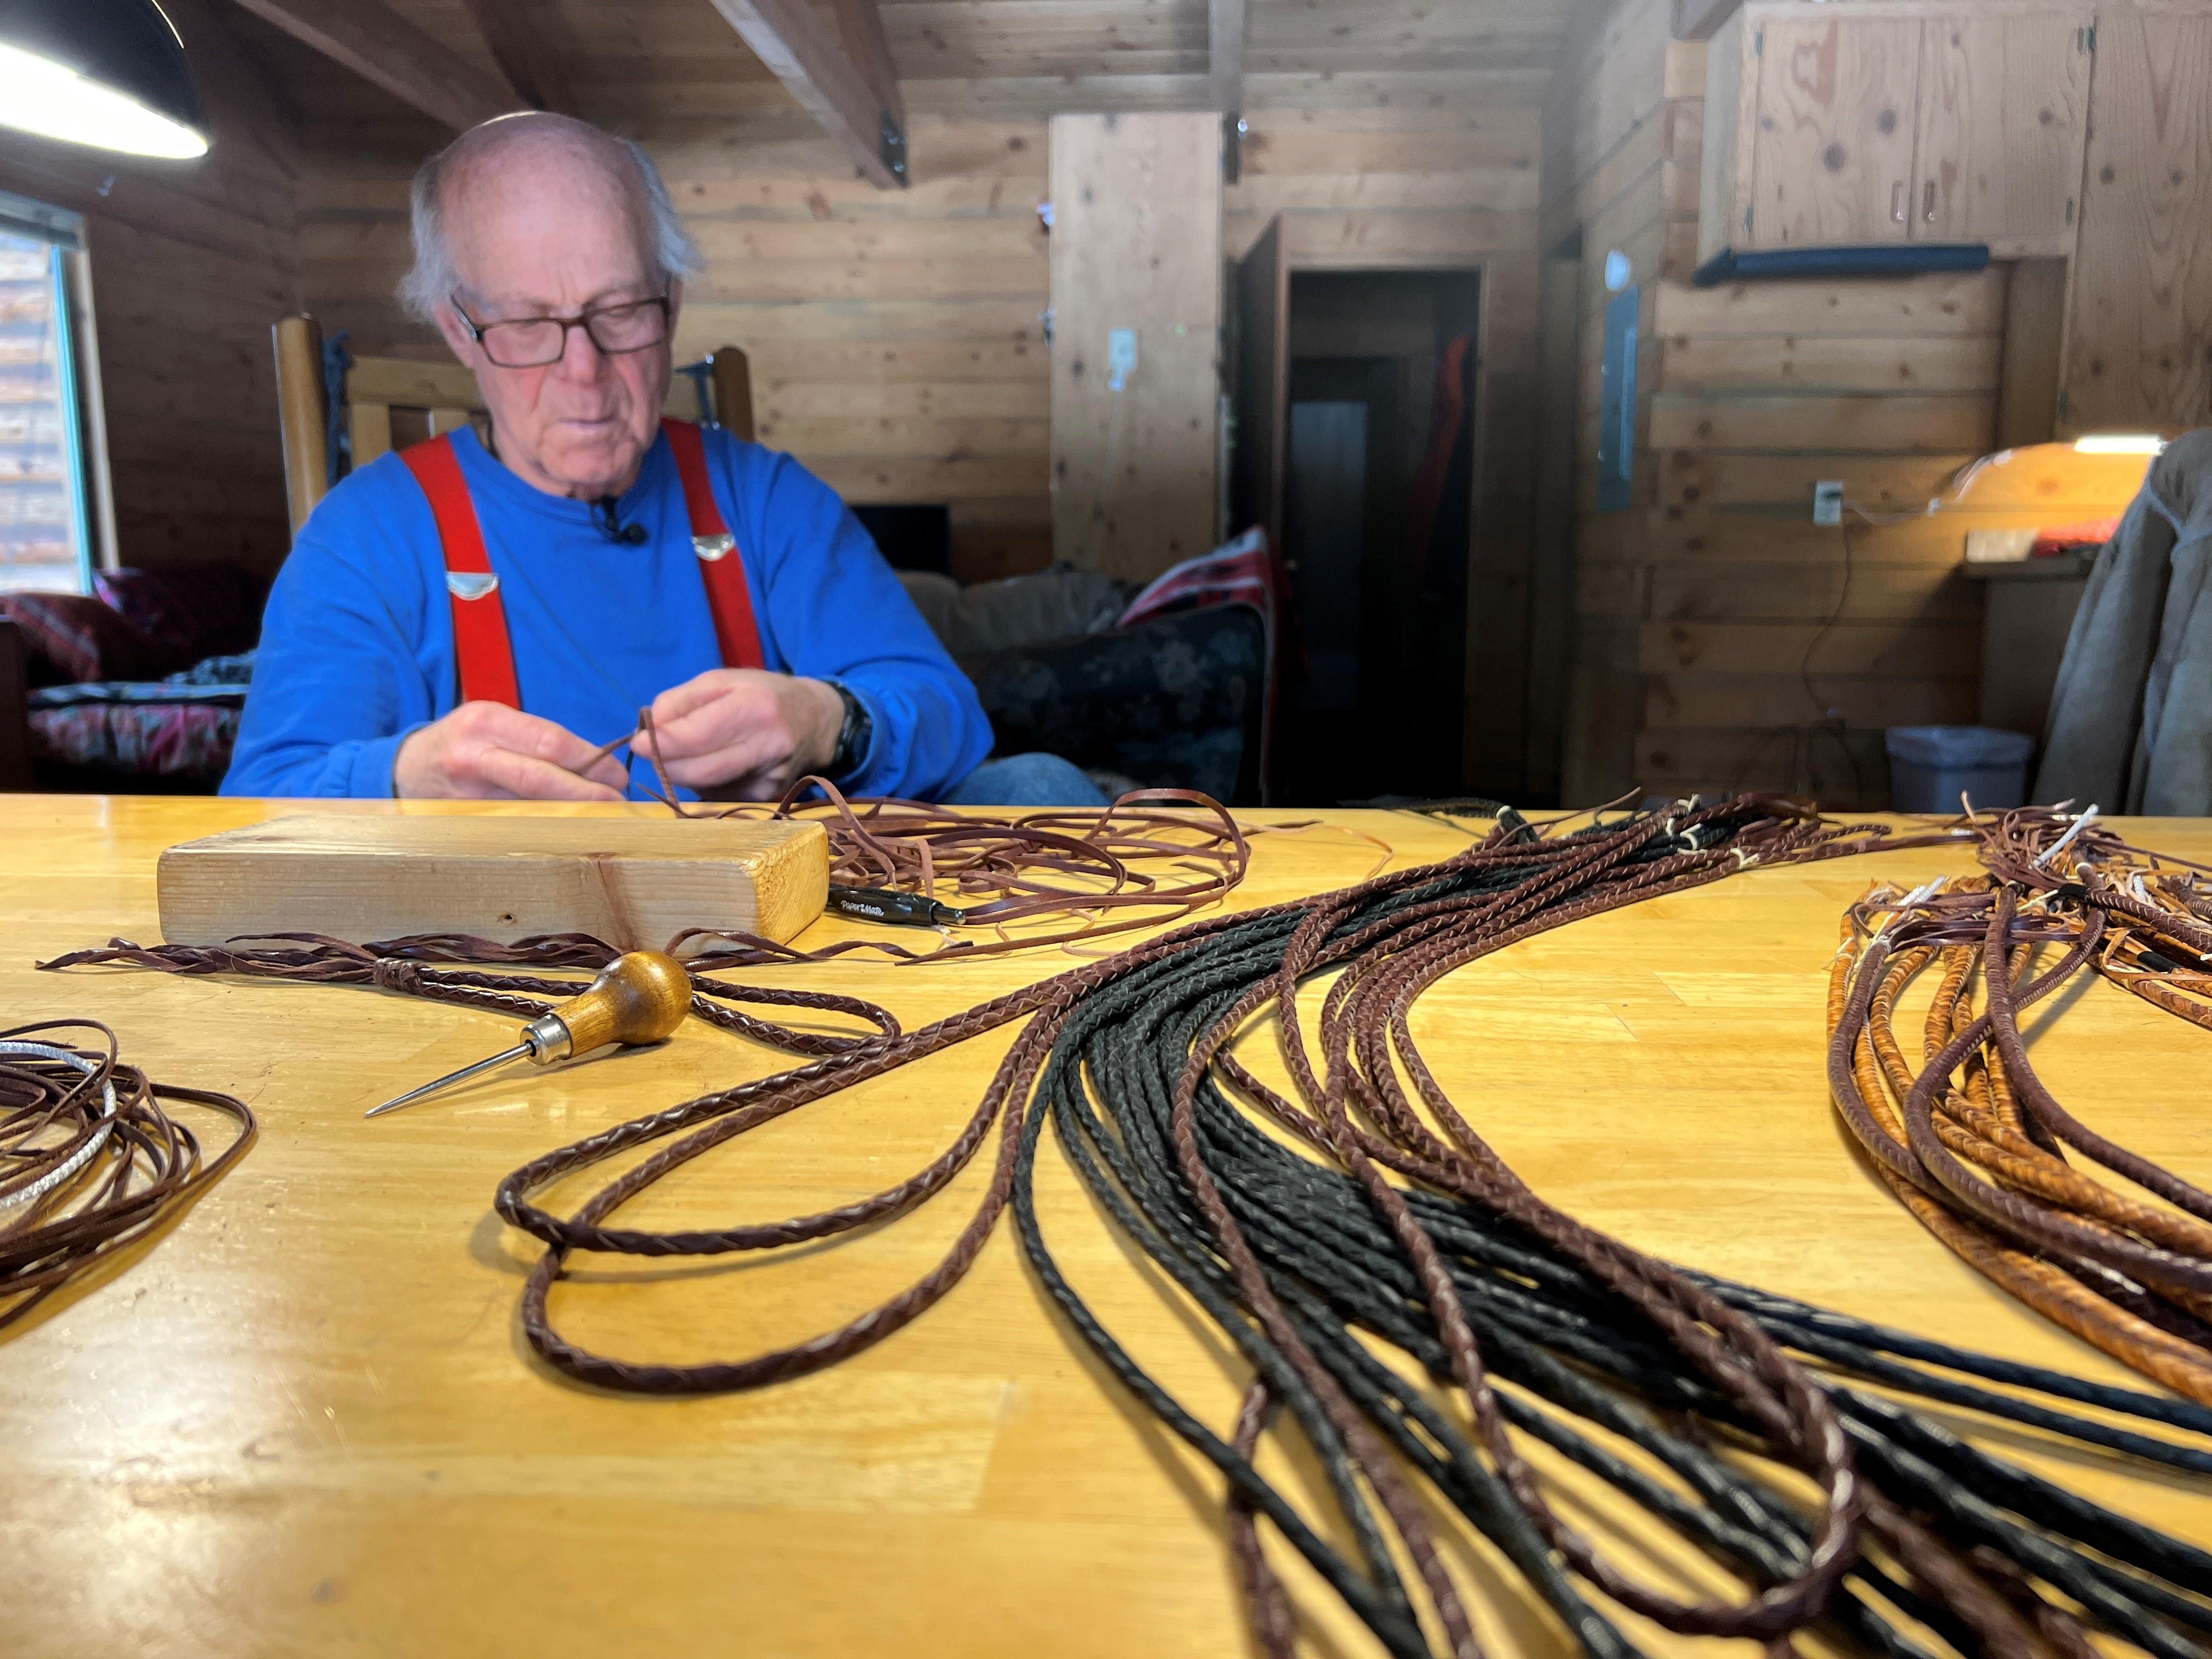 Mike “Hooey” Storch, a leather braider in Donnelly, Idaho.